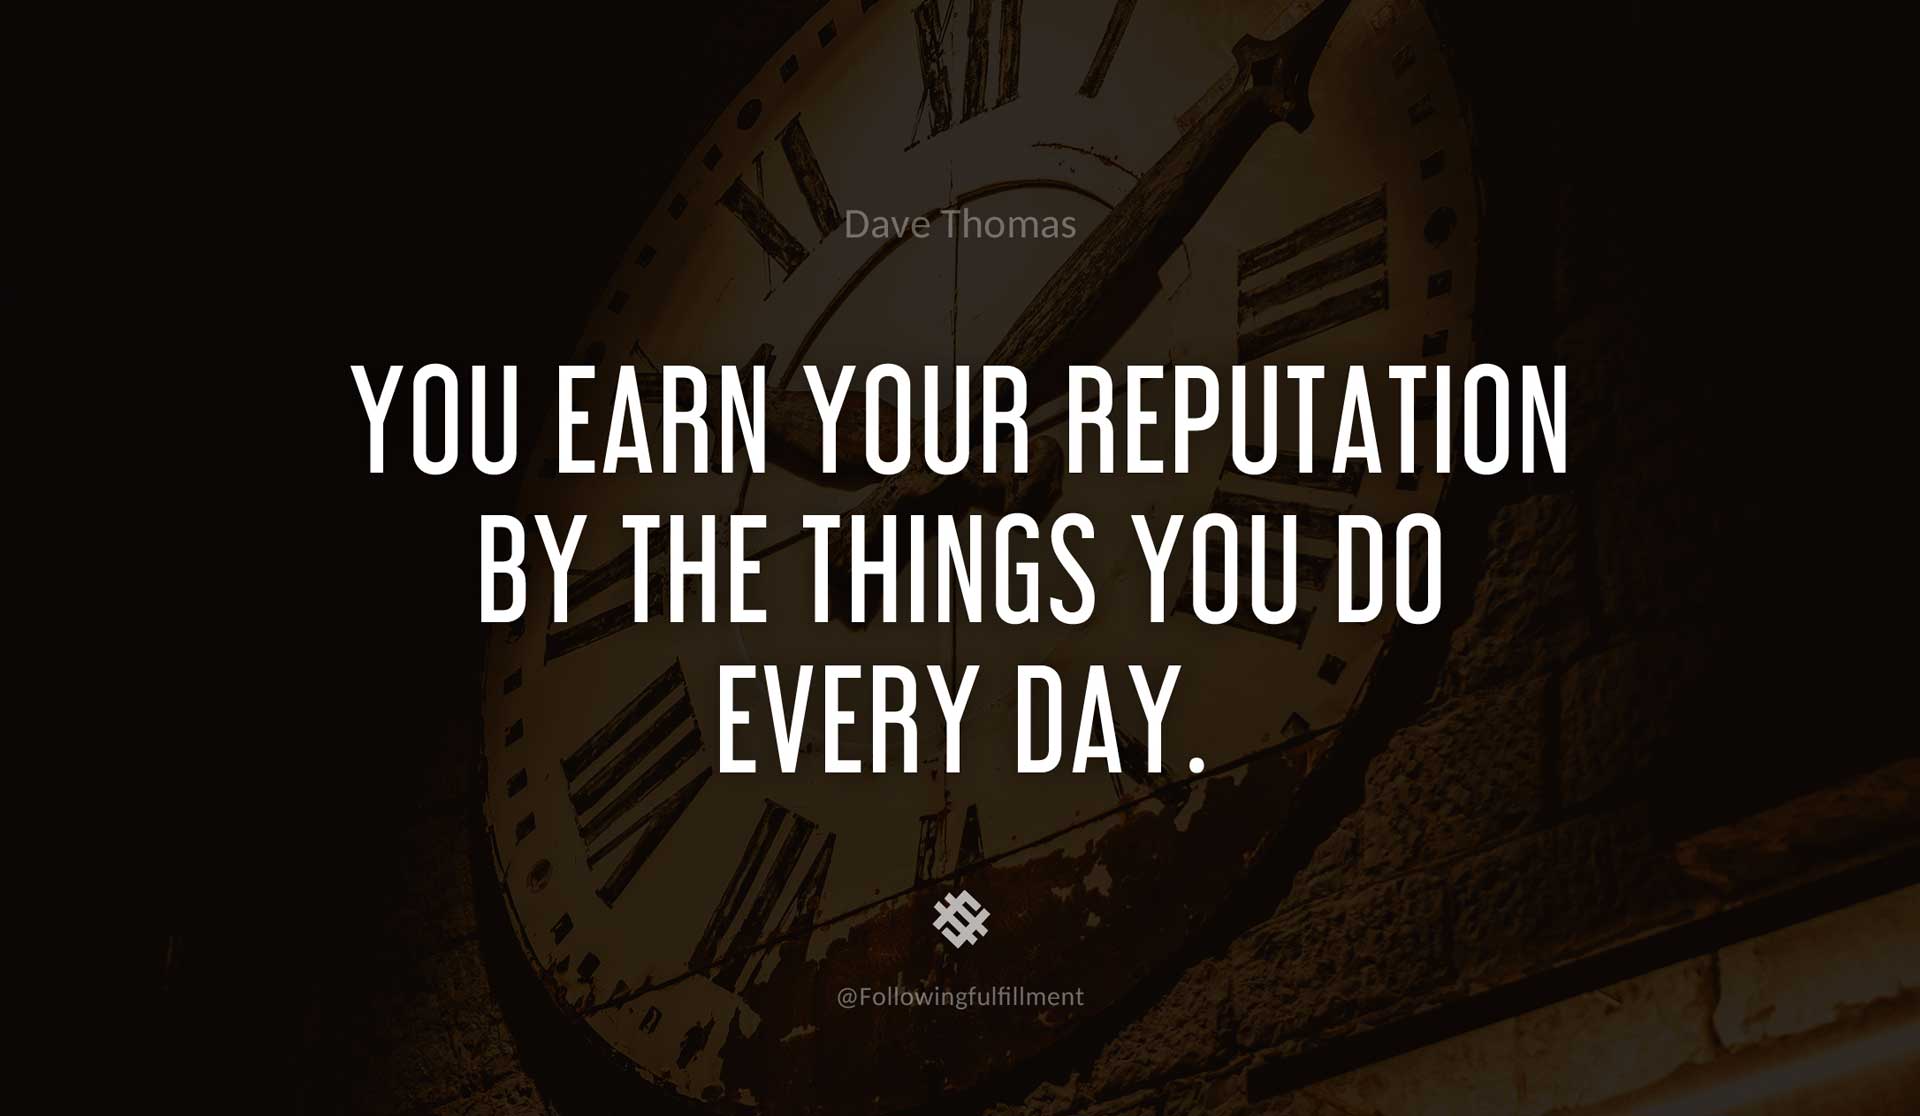 You-earn-your-reputation-by-the-things-you-do-every-day.-DAVE-THOMAS-Quote.jpg